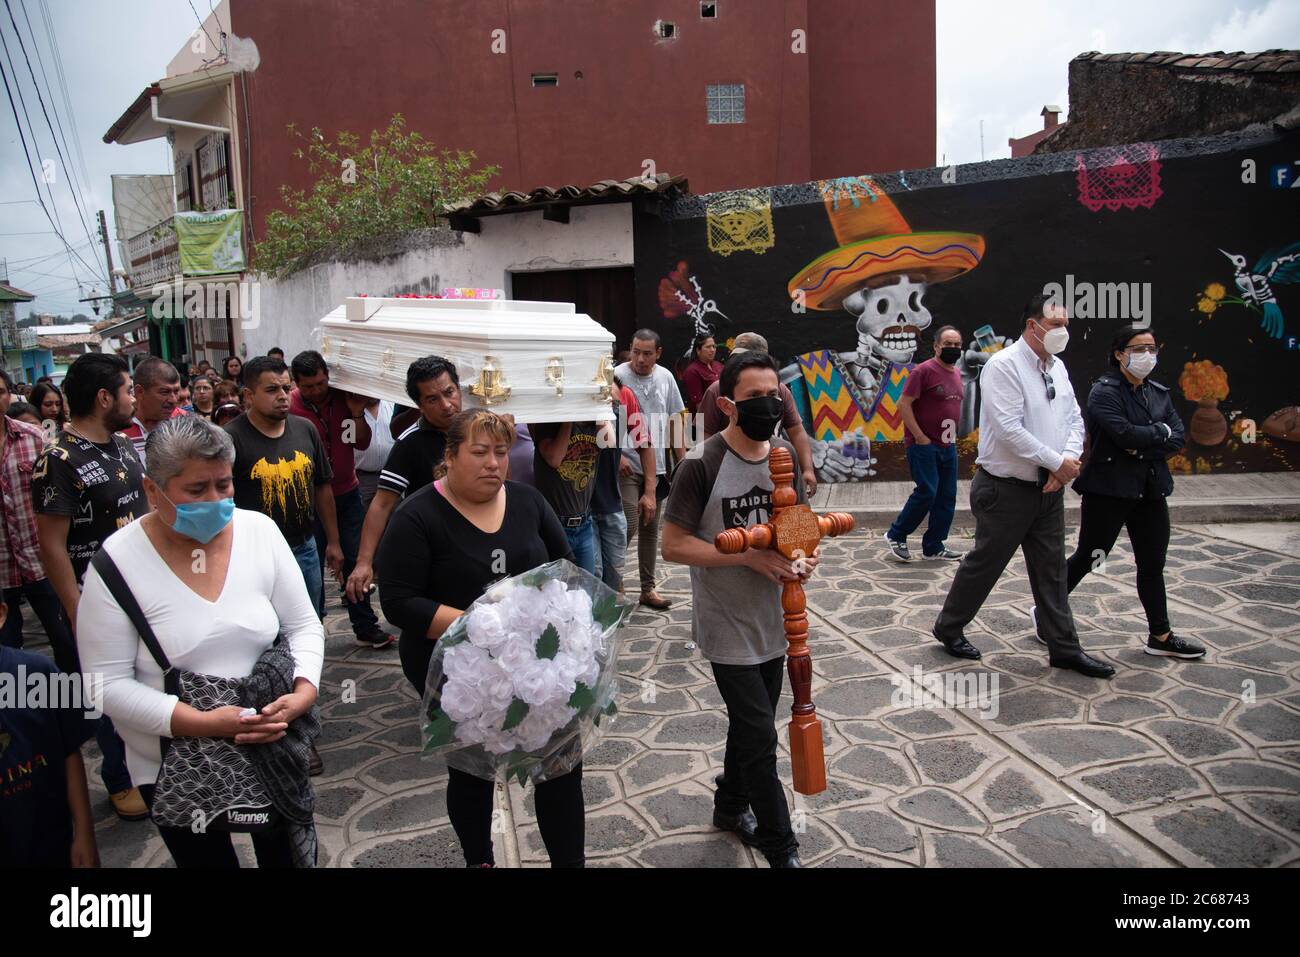 Naolinco, Veracruz, México. 7th July, 2020. Relatives and friends bid farewell to the remains of Reina Isabel MÃ¡rquez, a 12-year-old girl who was a victim of child femicide who was disappeared in recent days and for whom various search filters were activated in the state. The murder occurred in Naolinco Veracruz, very close to the state capital where his remains were buried today. Credit: Hector Adolfo Quintanar Perez/ZUMA Wire/Alamy Live News Stock Photo